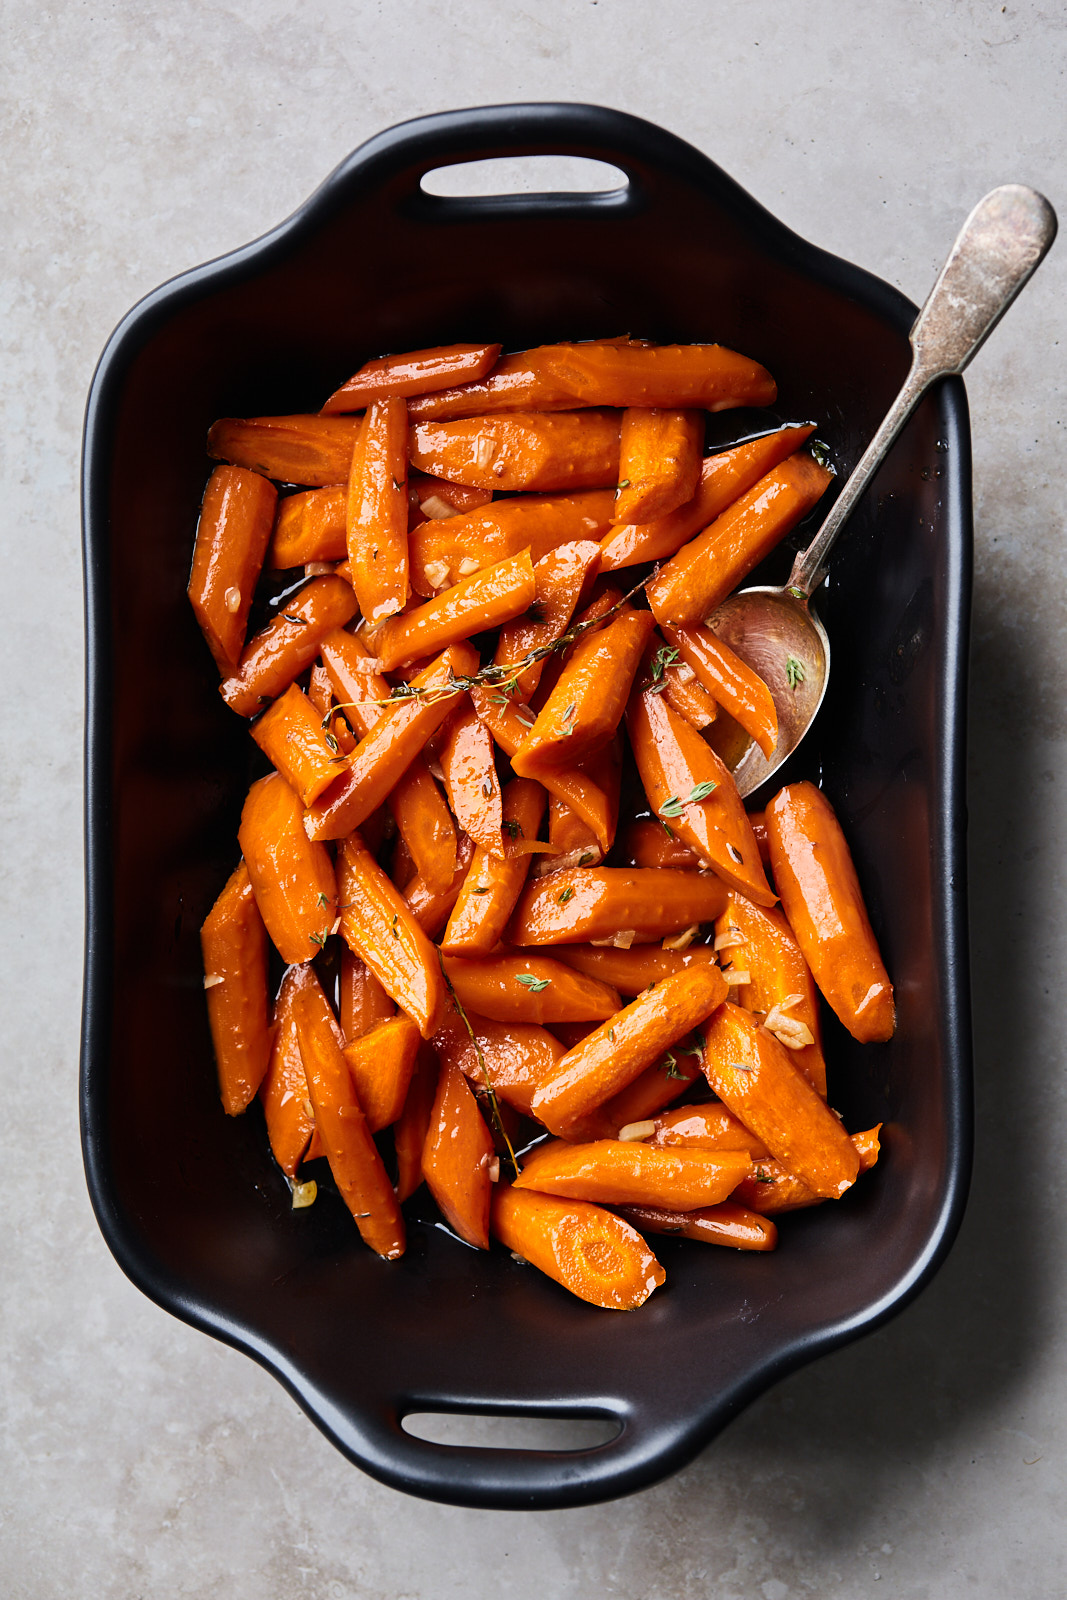 Brown Butter Garlic Maple Roasted Carrot